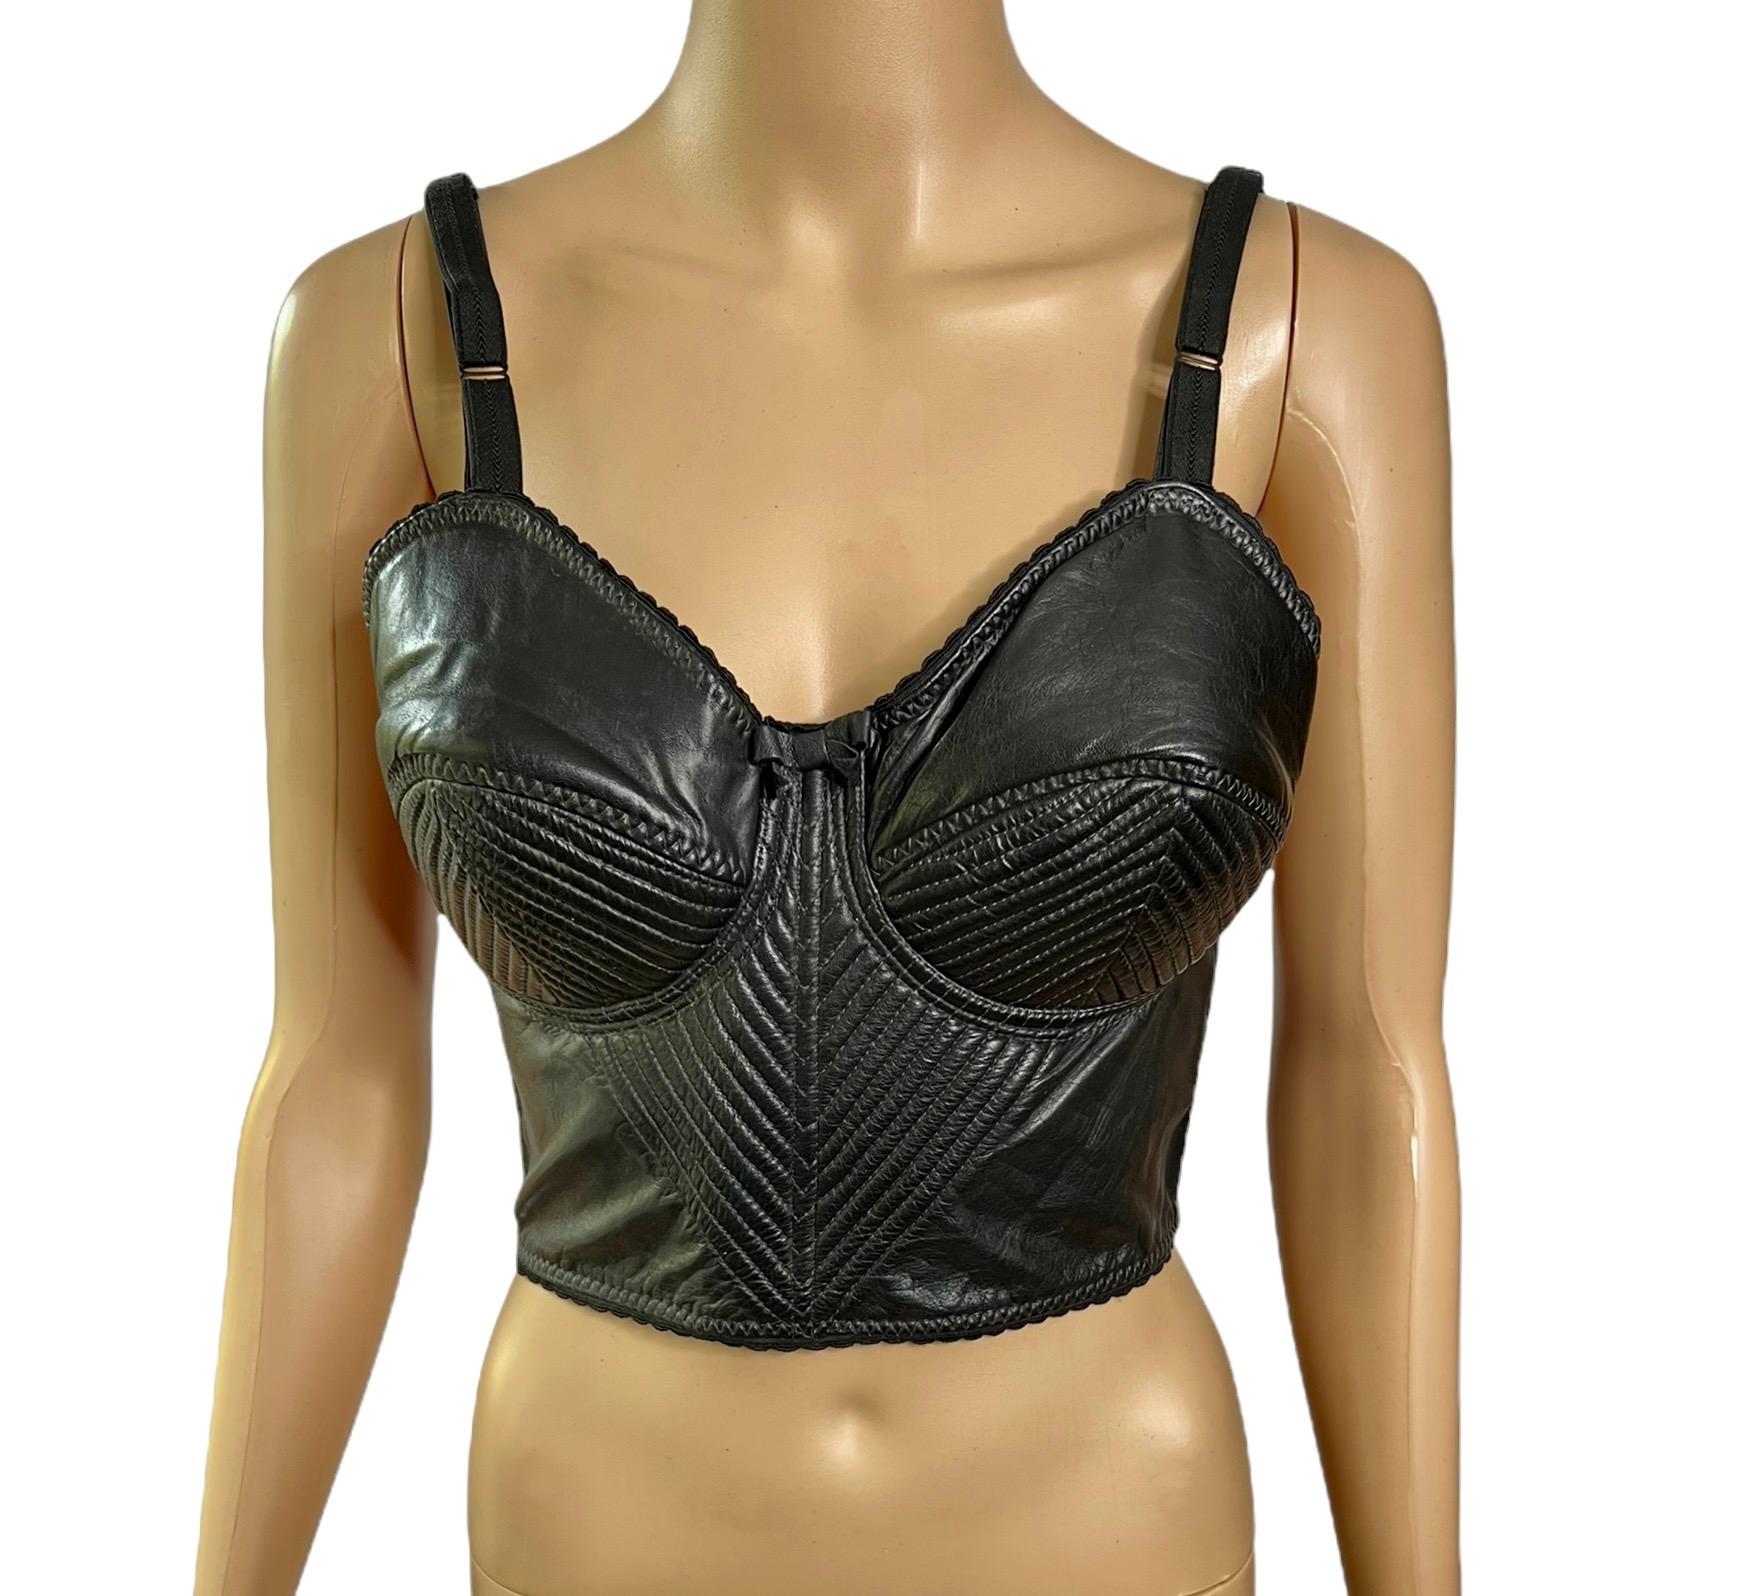 Jean Paul Gaultier S/S 1987 Vintage Bustier Cone Bra Leather Black Crop Top In Good Condition For Sale In Naples, FL